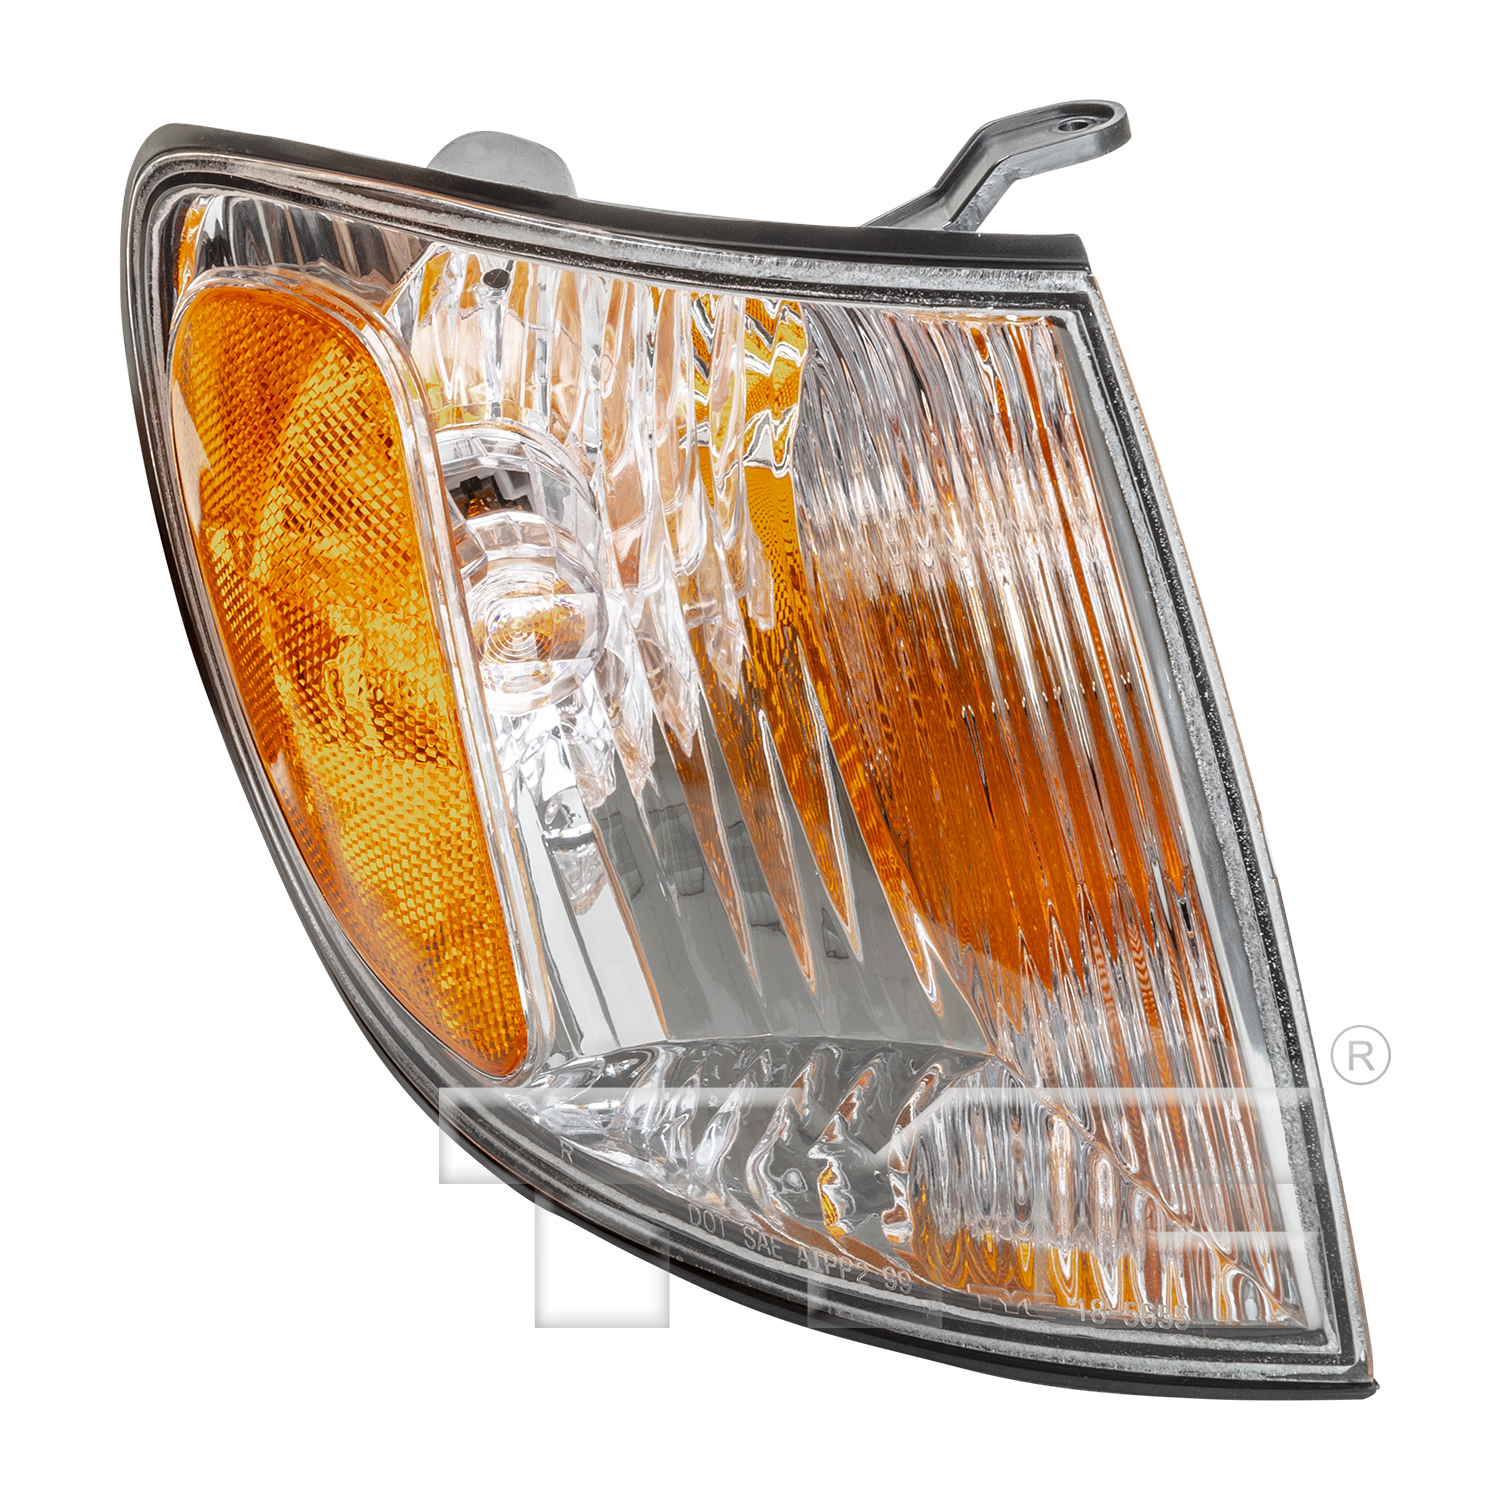 Aftermarket LAMPS for TOYOTA - SIENNA, SIENNA,01-03,RT Front signal lamp